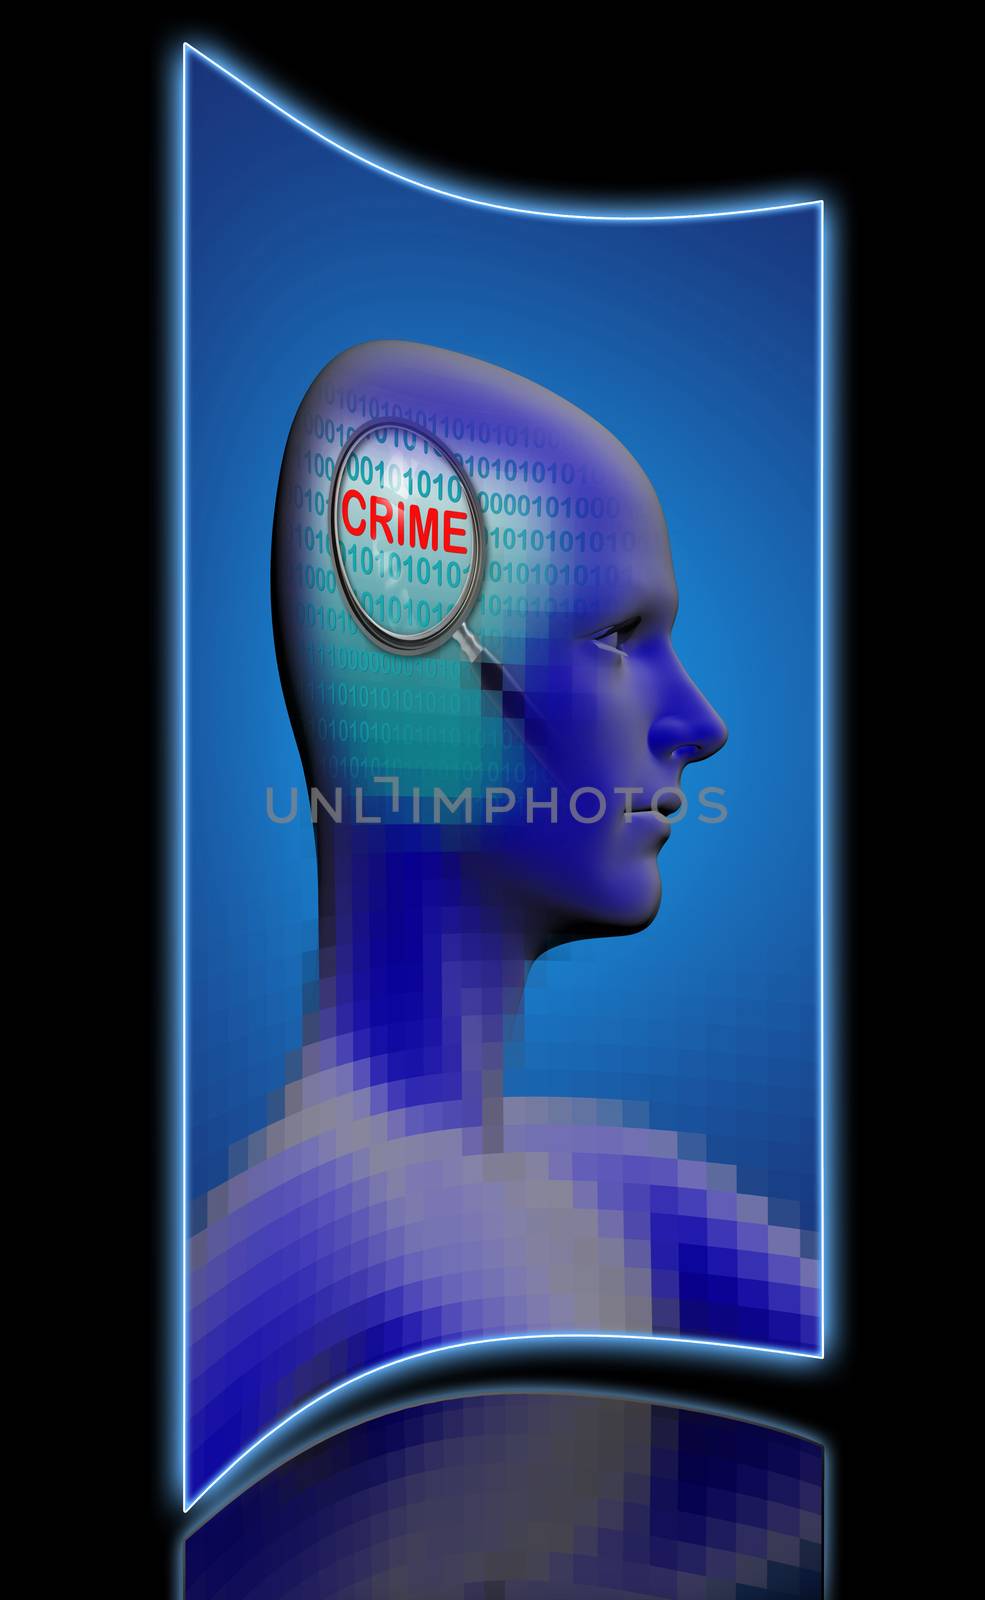 profile of a man with close up of magnifying glass on crime   made in 2d software